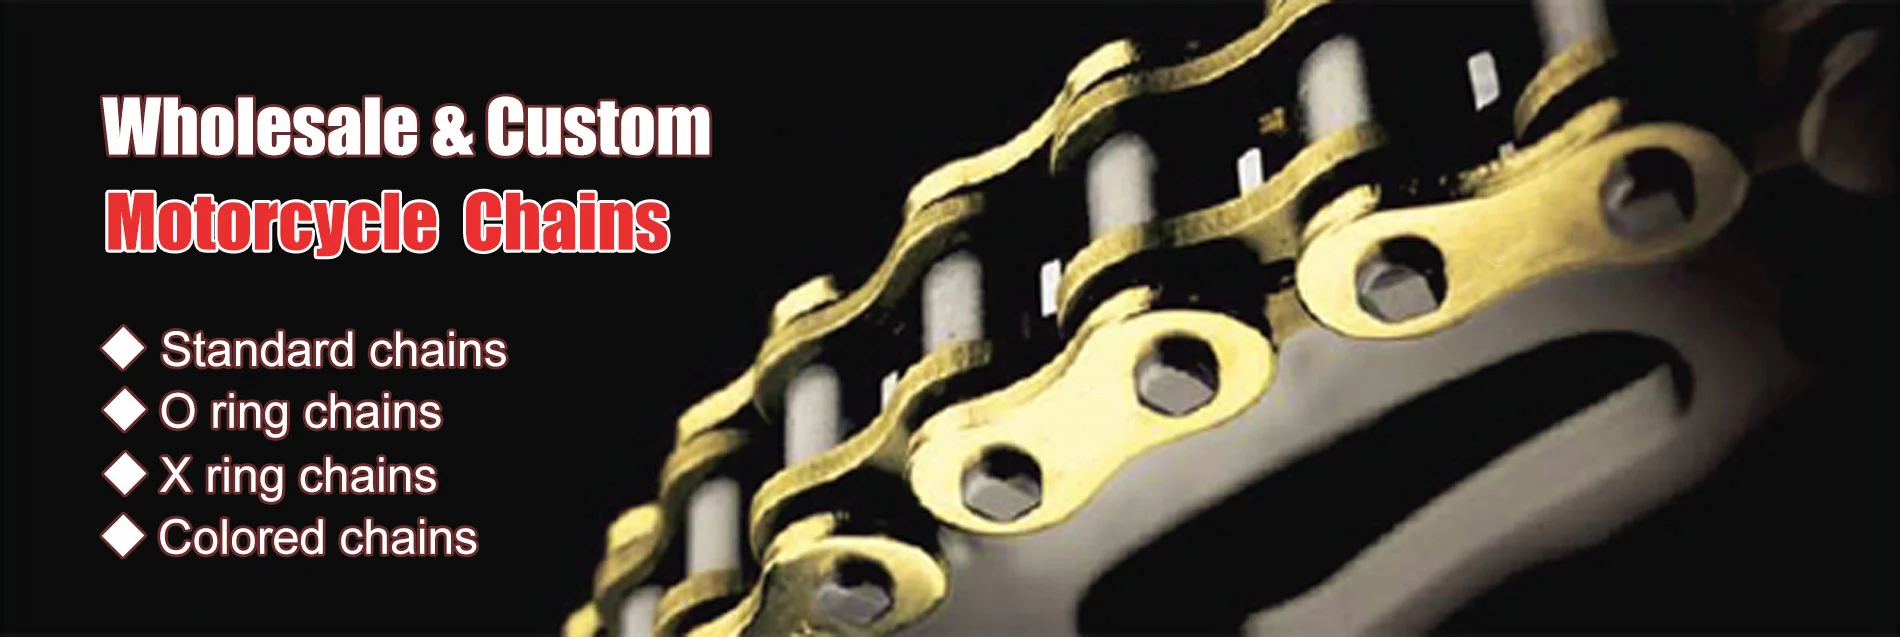 Motorcycle chains  /  Standard chains